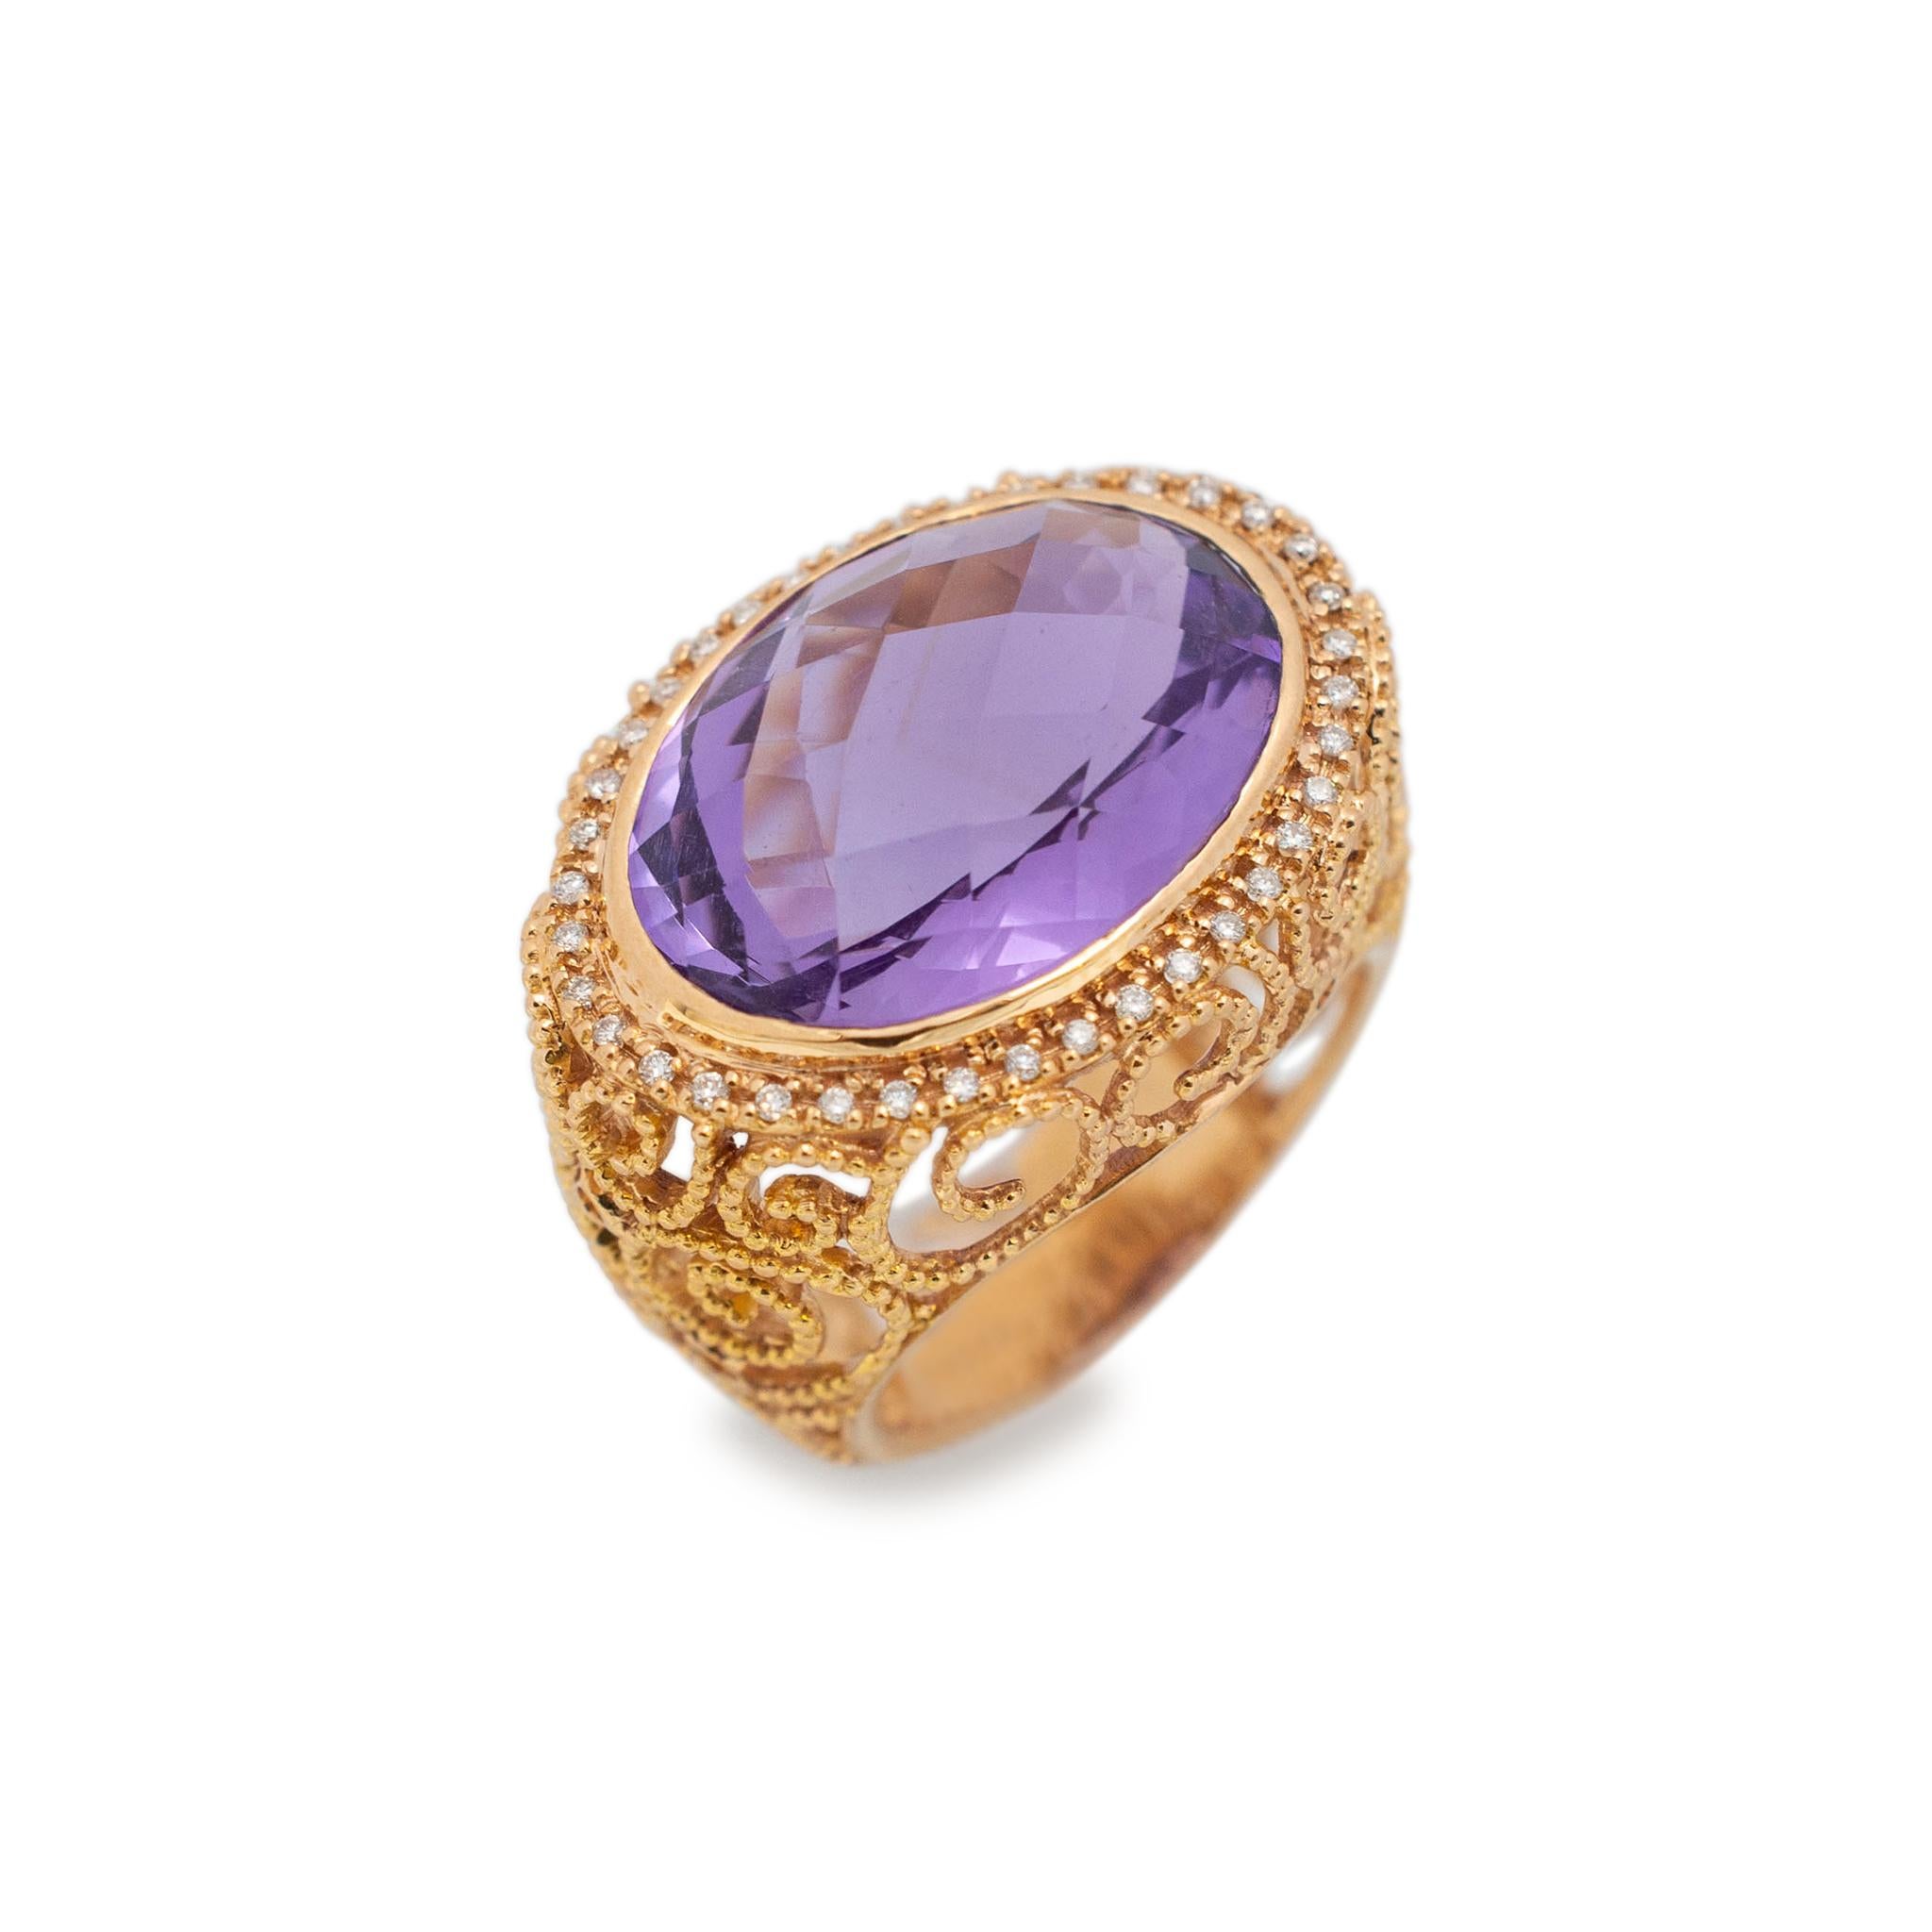 Gender: Ladies

Metal Type: 18K Rose Gold

Ring Size: 6.5

Shank Width: 17.90 mm tapering to 6.30 mm 

Total weight: 10.90 grams

Ladies 18K rose gold diamond and amethyst cocktail halo ring with a tapered shank. Stamped 